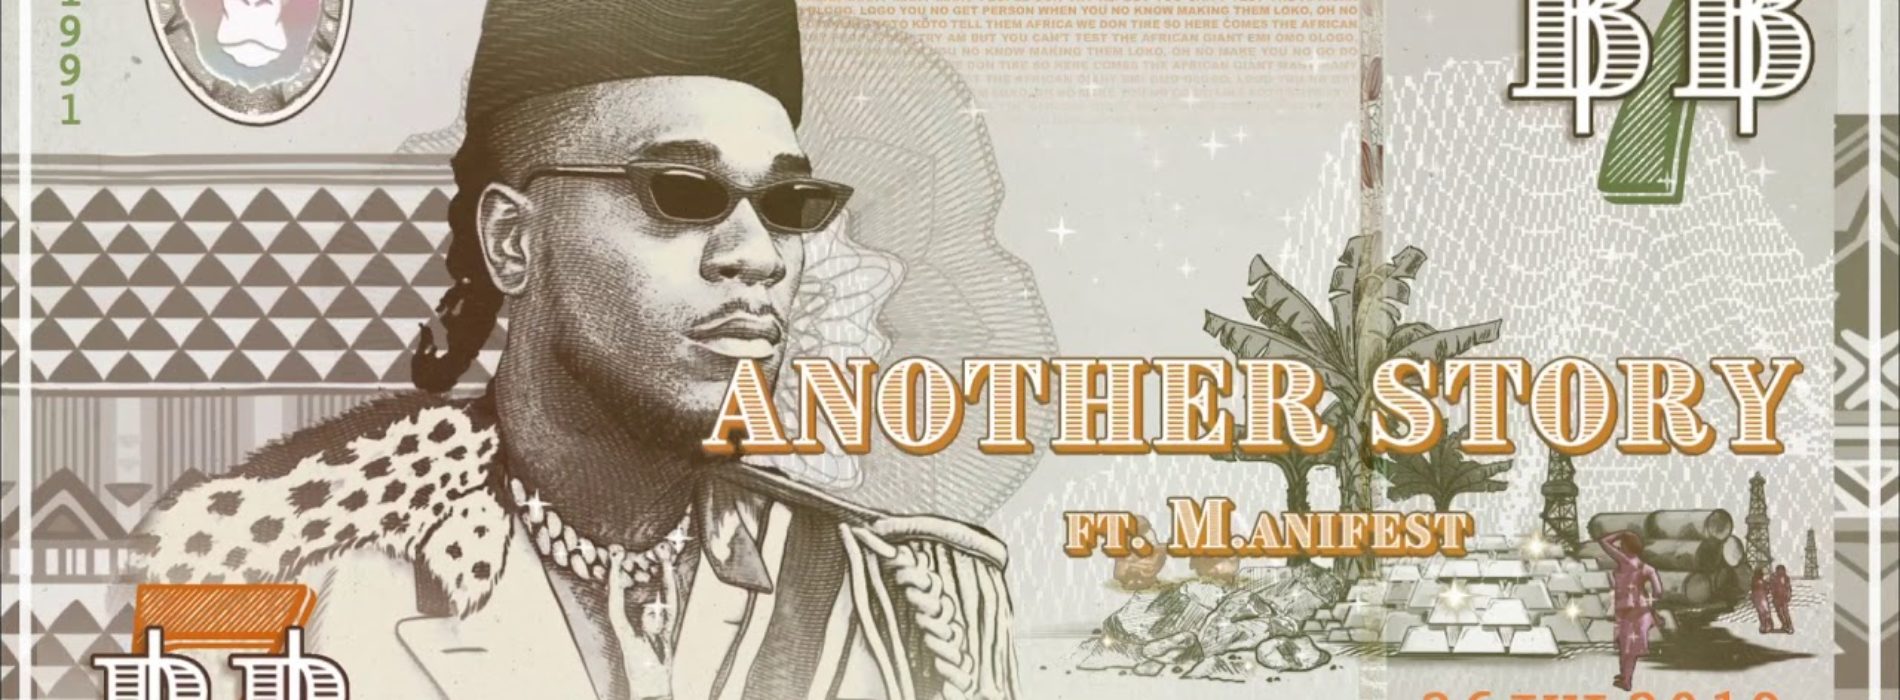 Burna Boy – Another Story (feat. M.anifest) [Official Video] – Octobre 2019